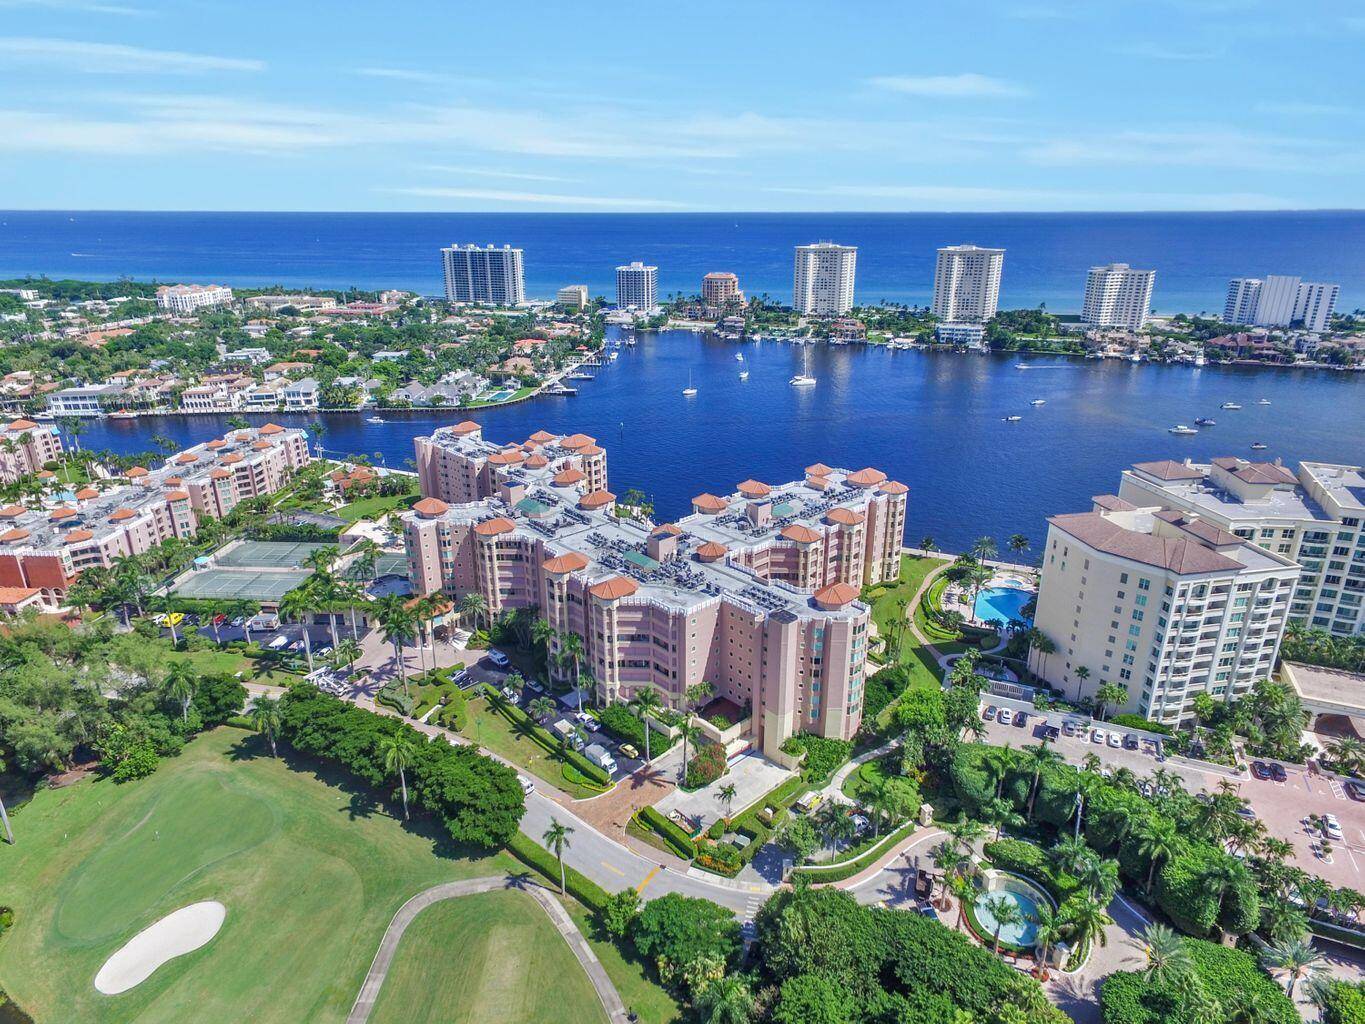 Beautiful 3 bedroom residence at the newly renovated Mizner Tower with expansive views of The Boca Raton Golf Course is being offered for the first time.